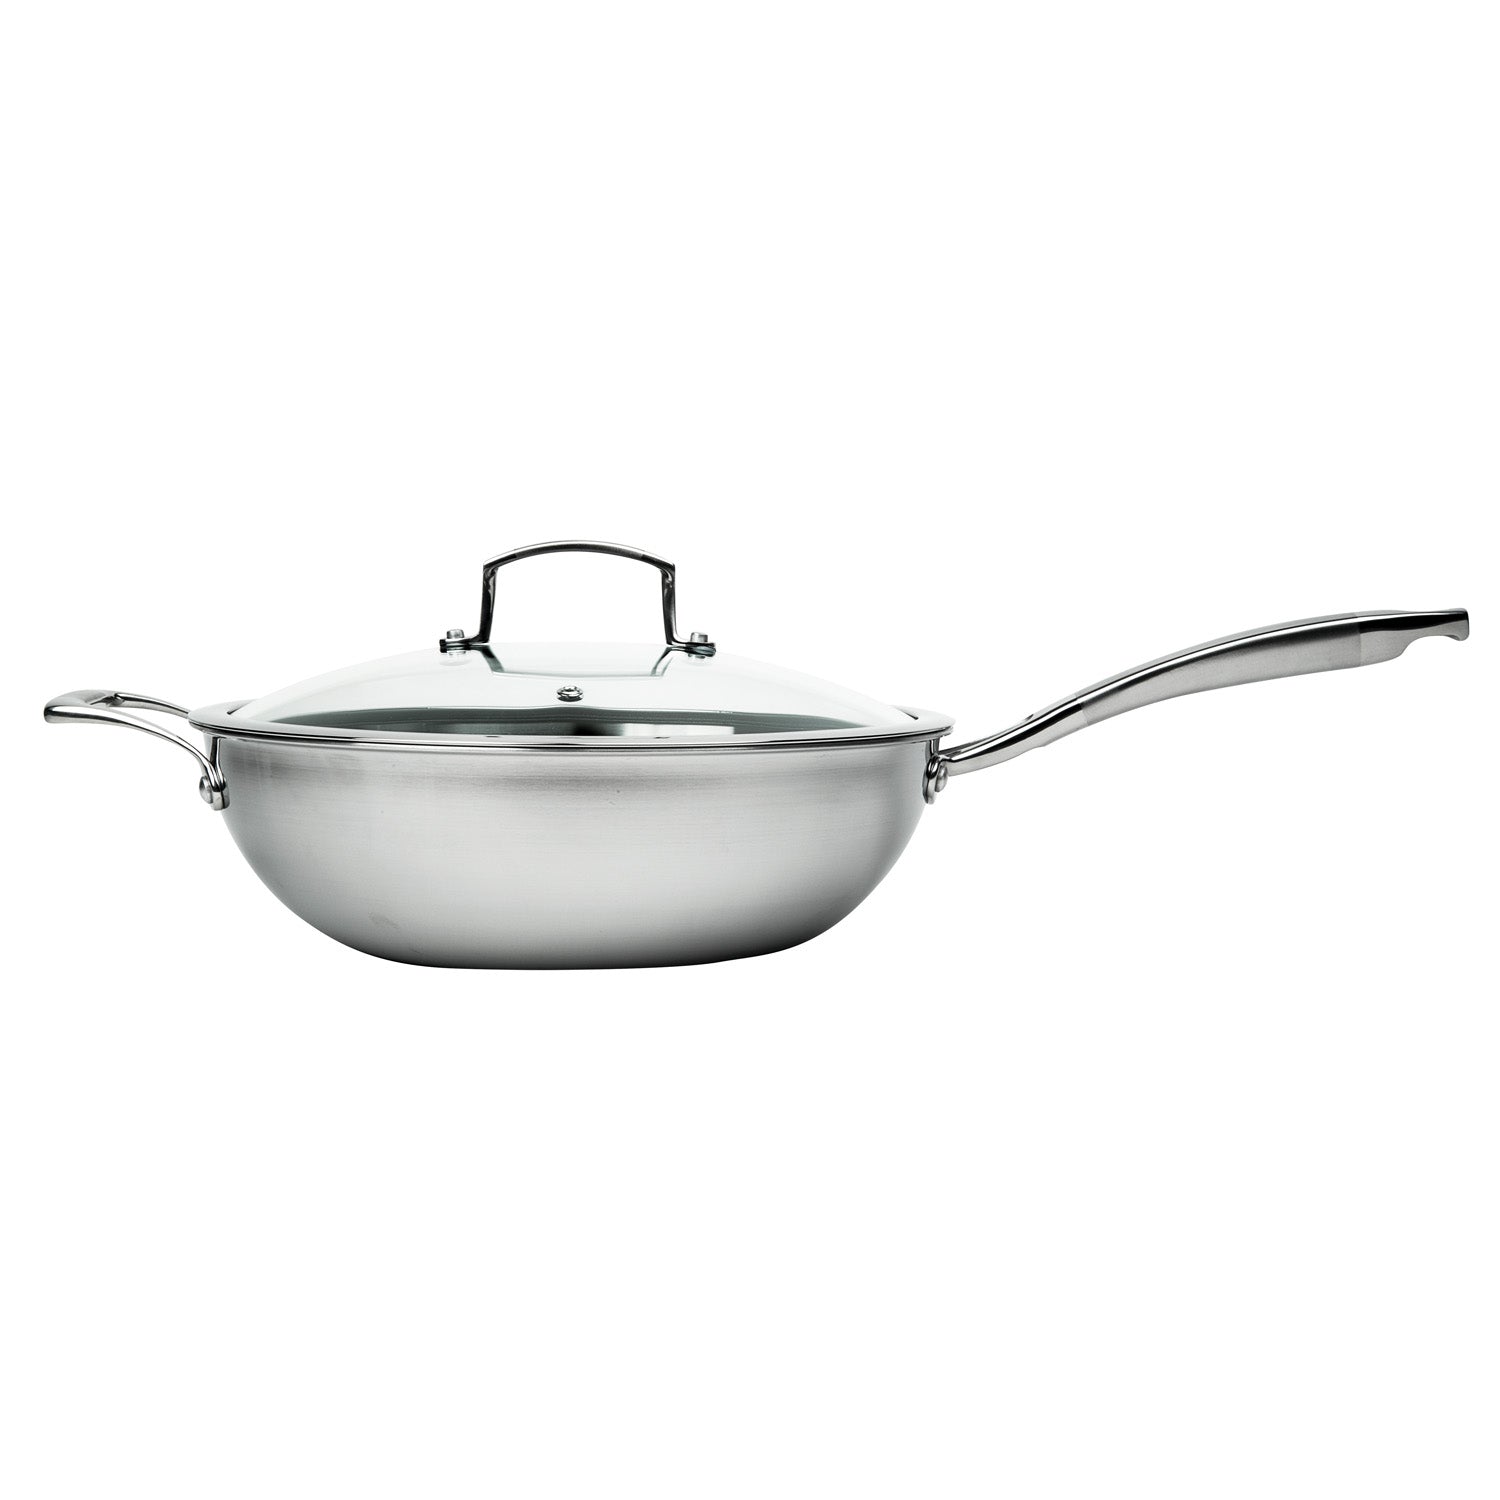 Products CHEFS WOK & GLASS LID, 3-PLY STAINLESS STEEL & ALUMINUM SCRATCH-RESISTANT, 12